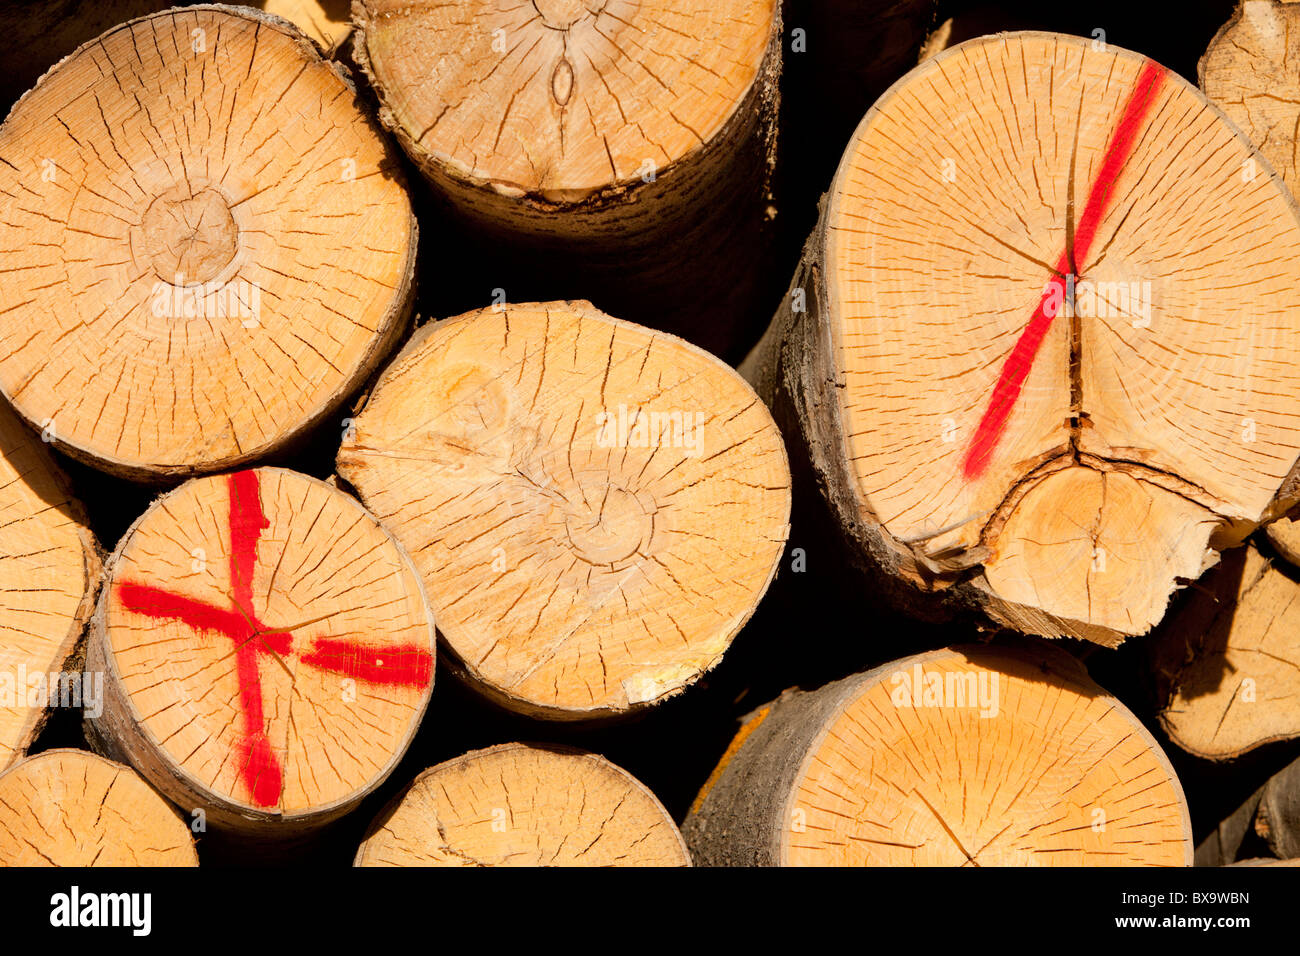 The sawed ends of a Eurasian aspen ( populus tremula )  logs in a pile . Discarded logs marked with red paint , Finland Stock Photo